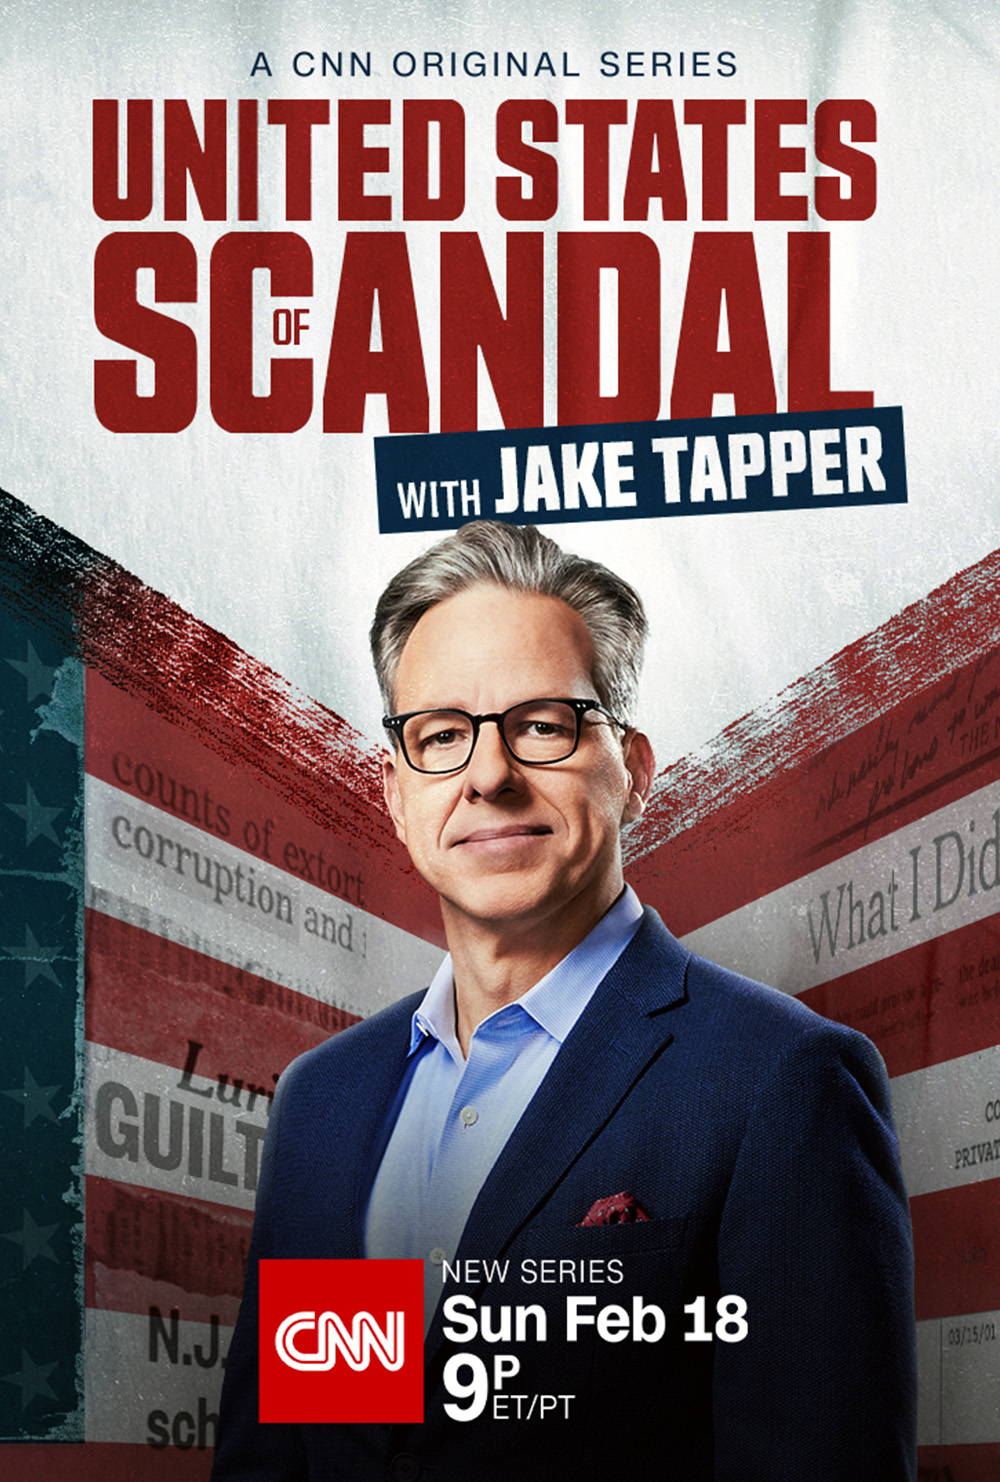 United States of Scandal with Jake Tapper A CNN original series new series Sun Feb 18 9p et/pt